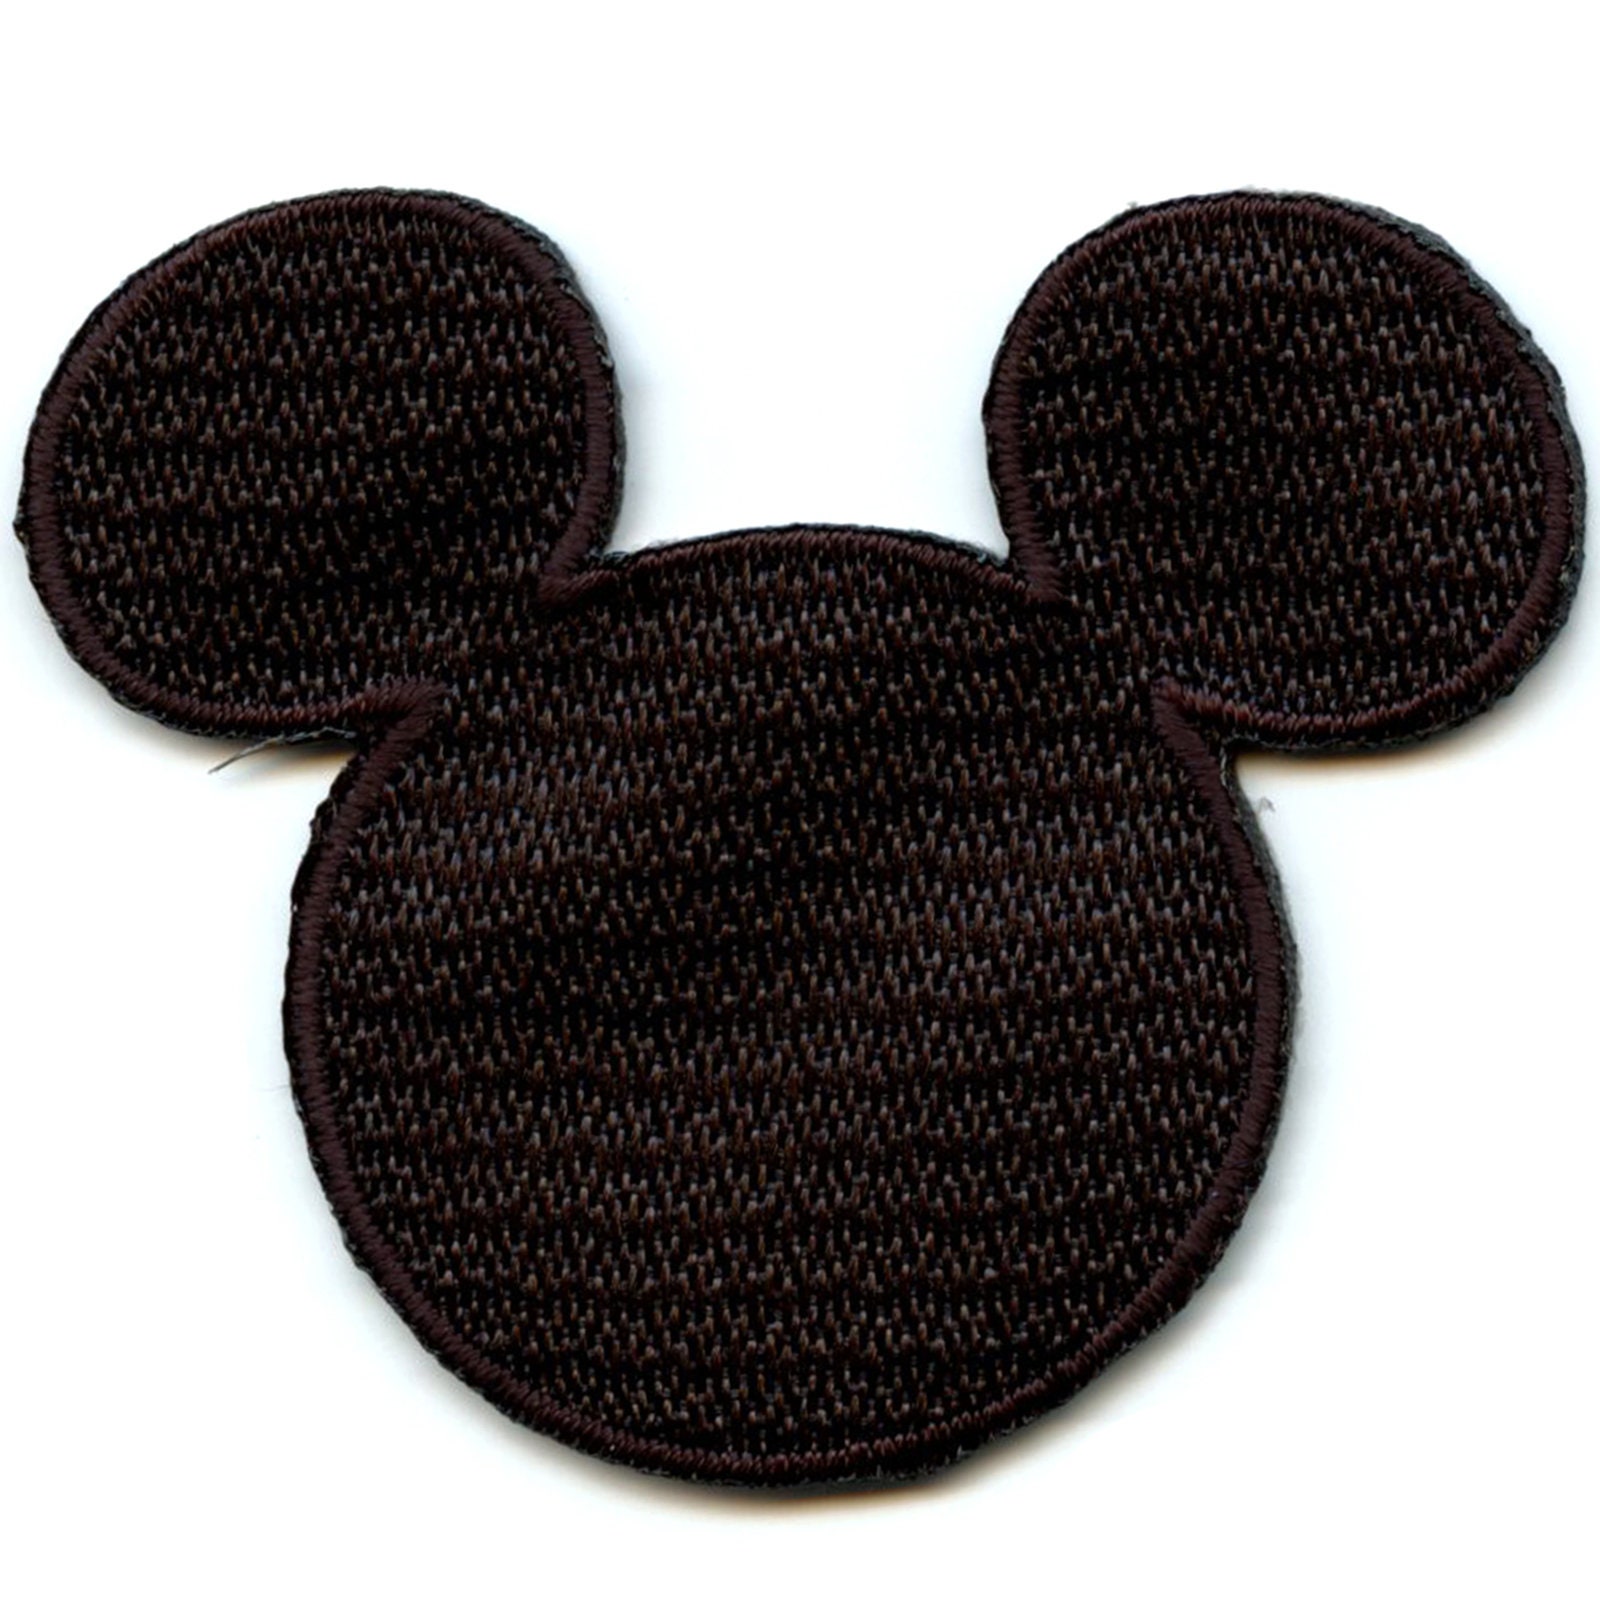 Simplicity Iron on Applique Mickey Mouse